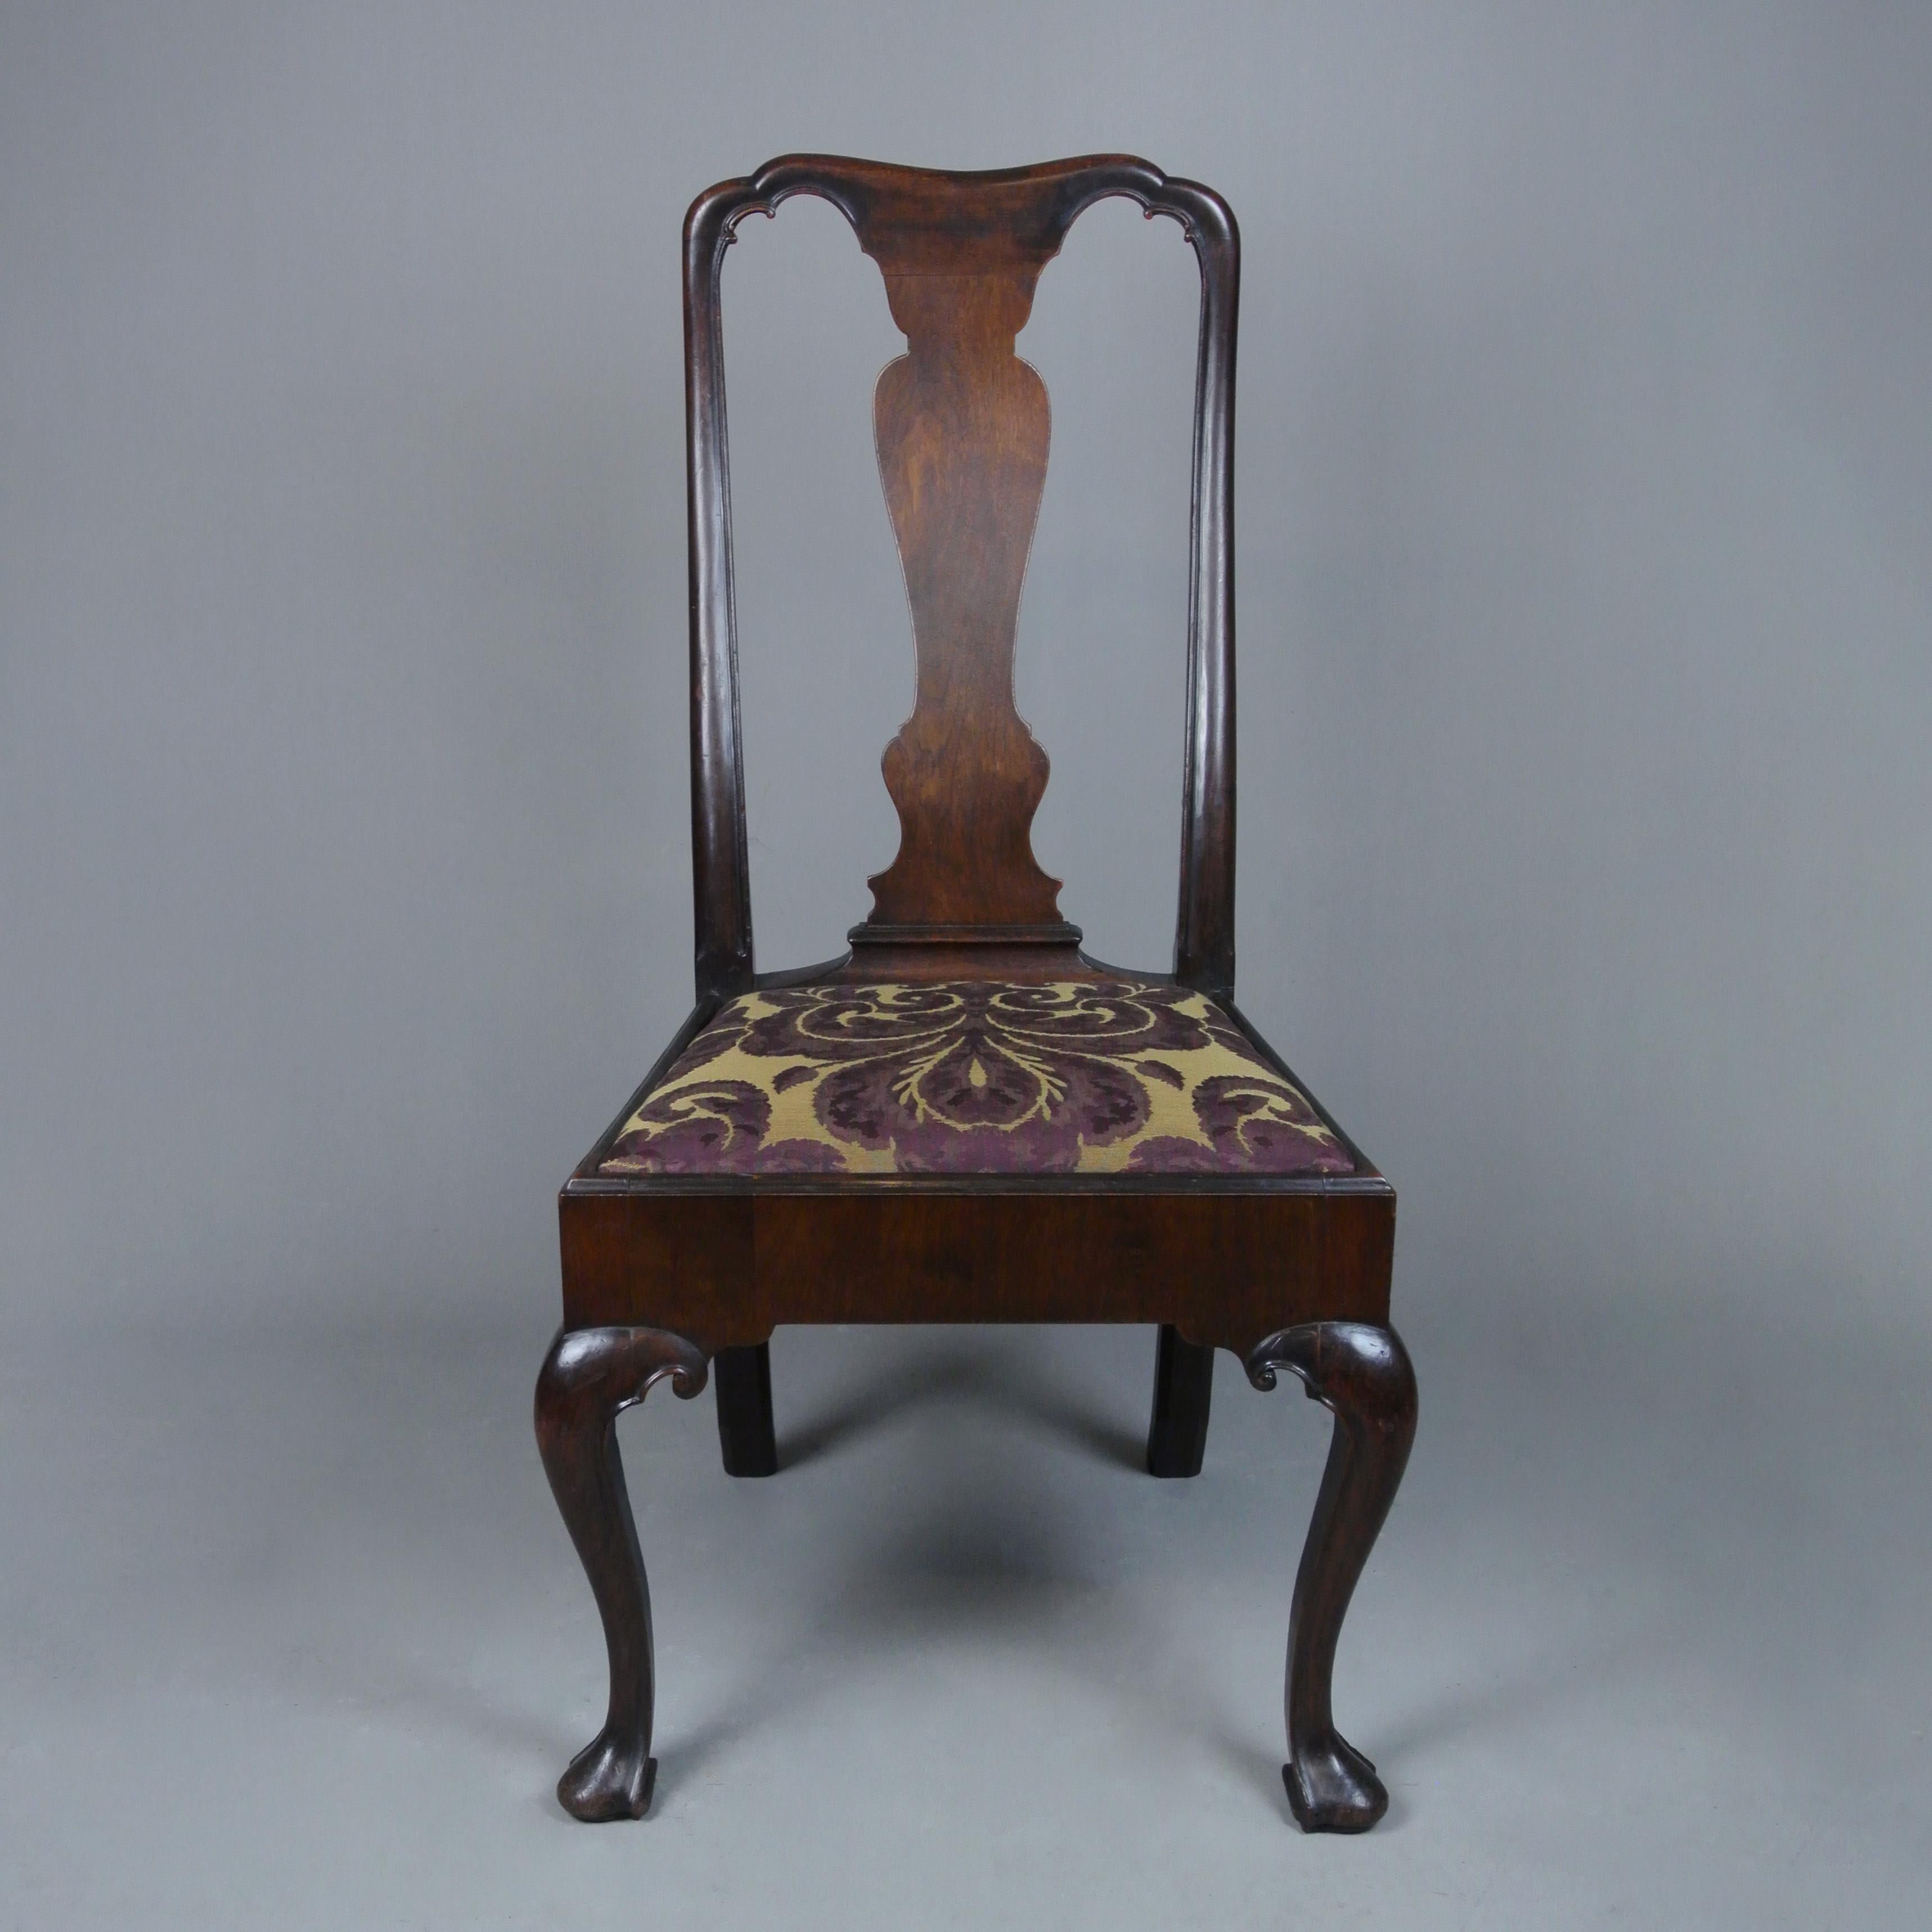 A very beautiful early Georgian chair in excellent original condition and very finely detailed in solid walnut.

The square seated thickly veneered in walnut and with arched well shaped splat. Small scrolls carved at the ears of the solid walnut